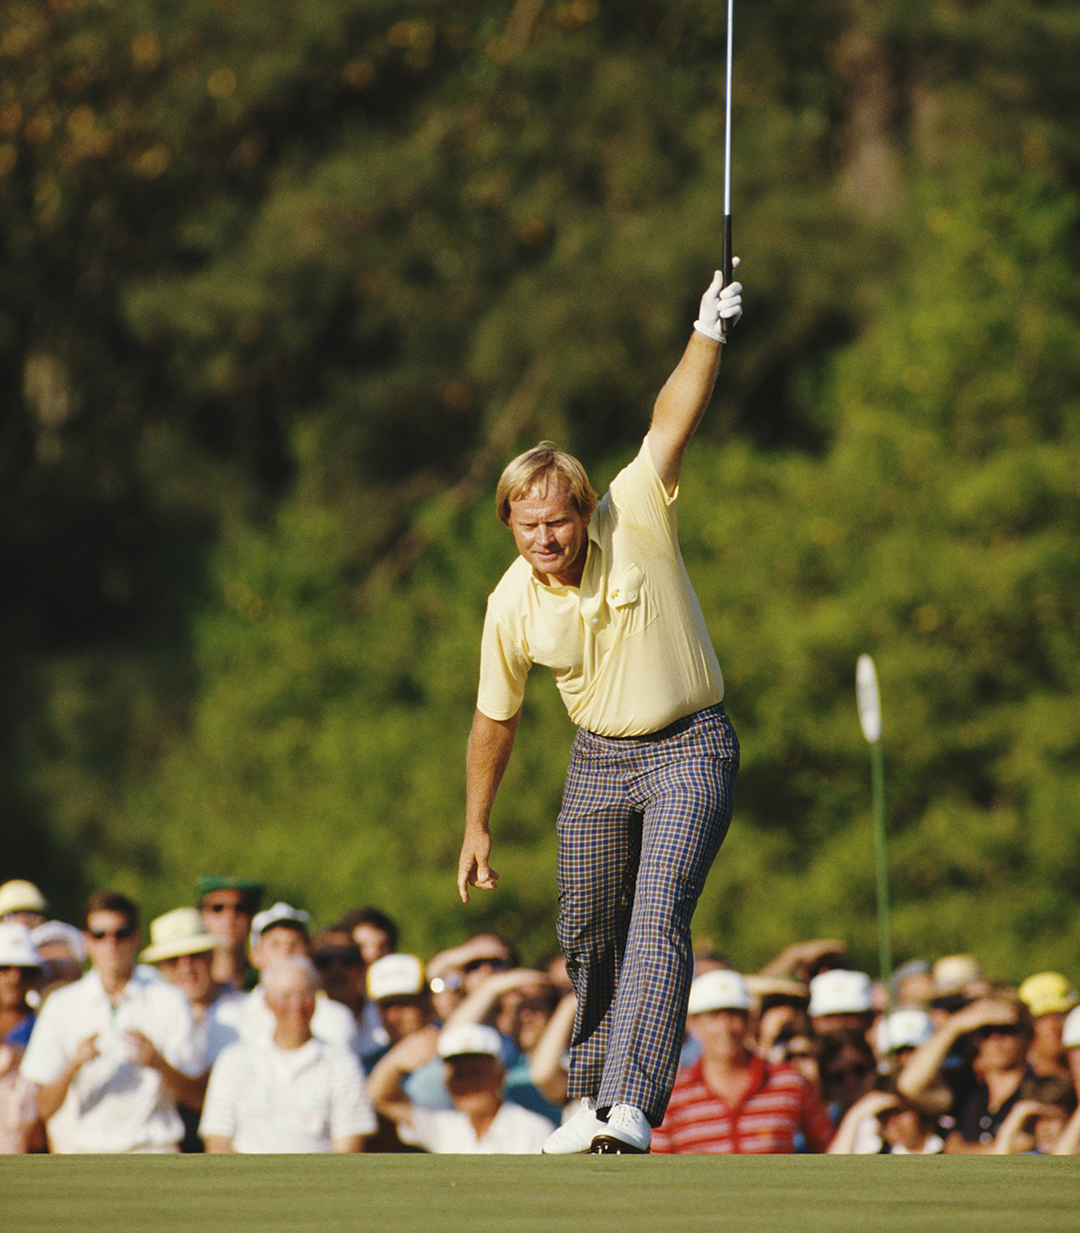 Jack Nicklaus at the 1986 Masters. Courtesy of David Cannon/Getty Images